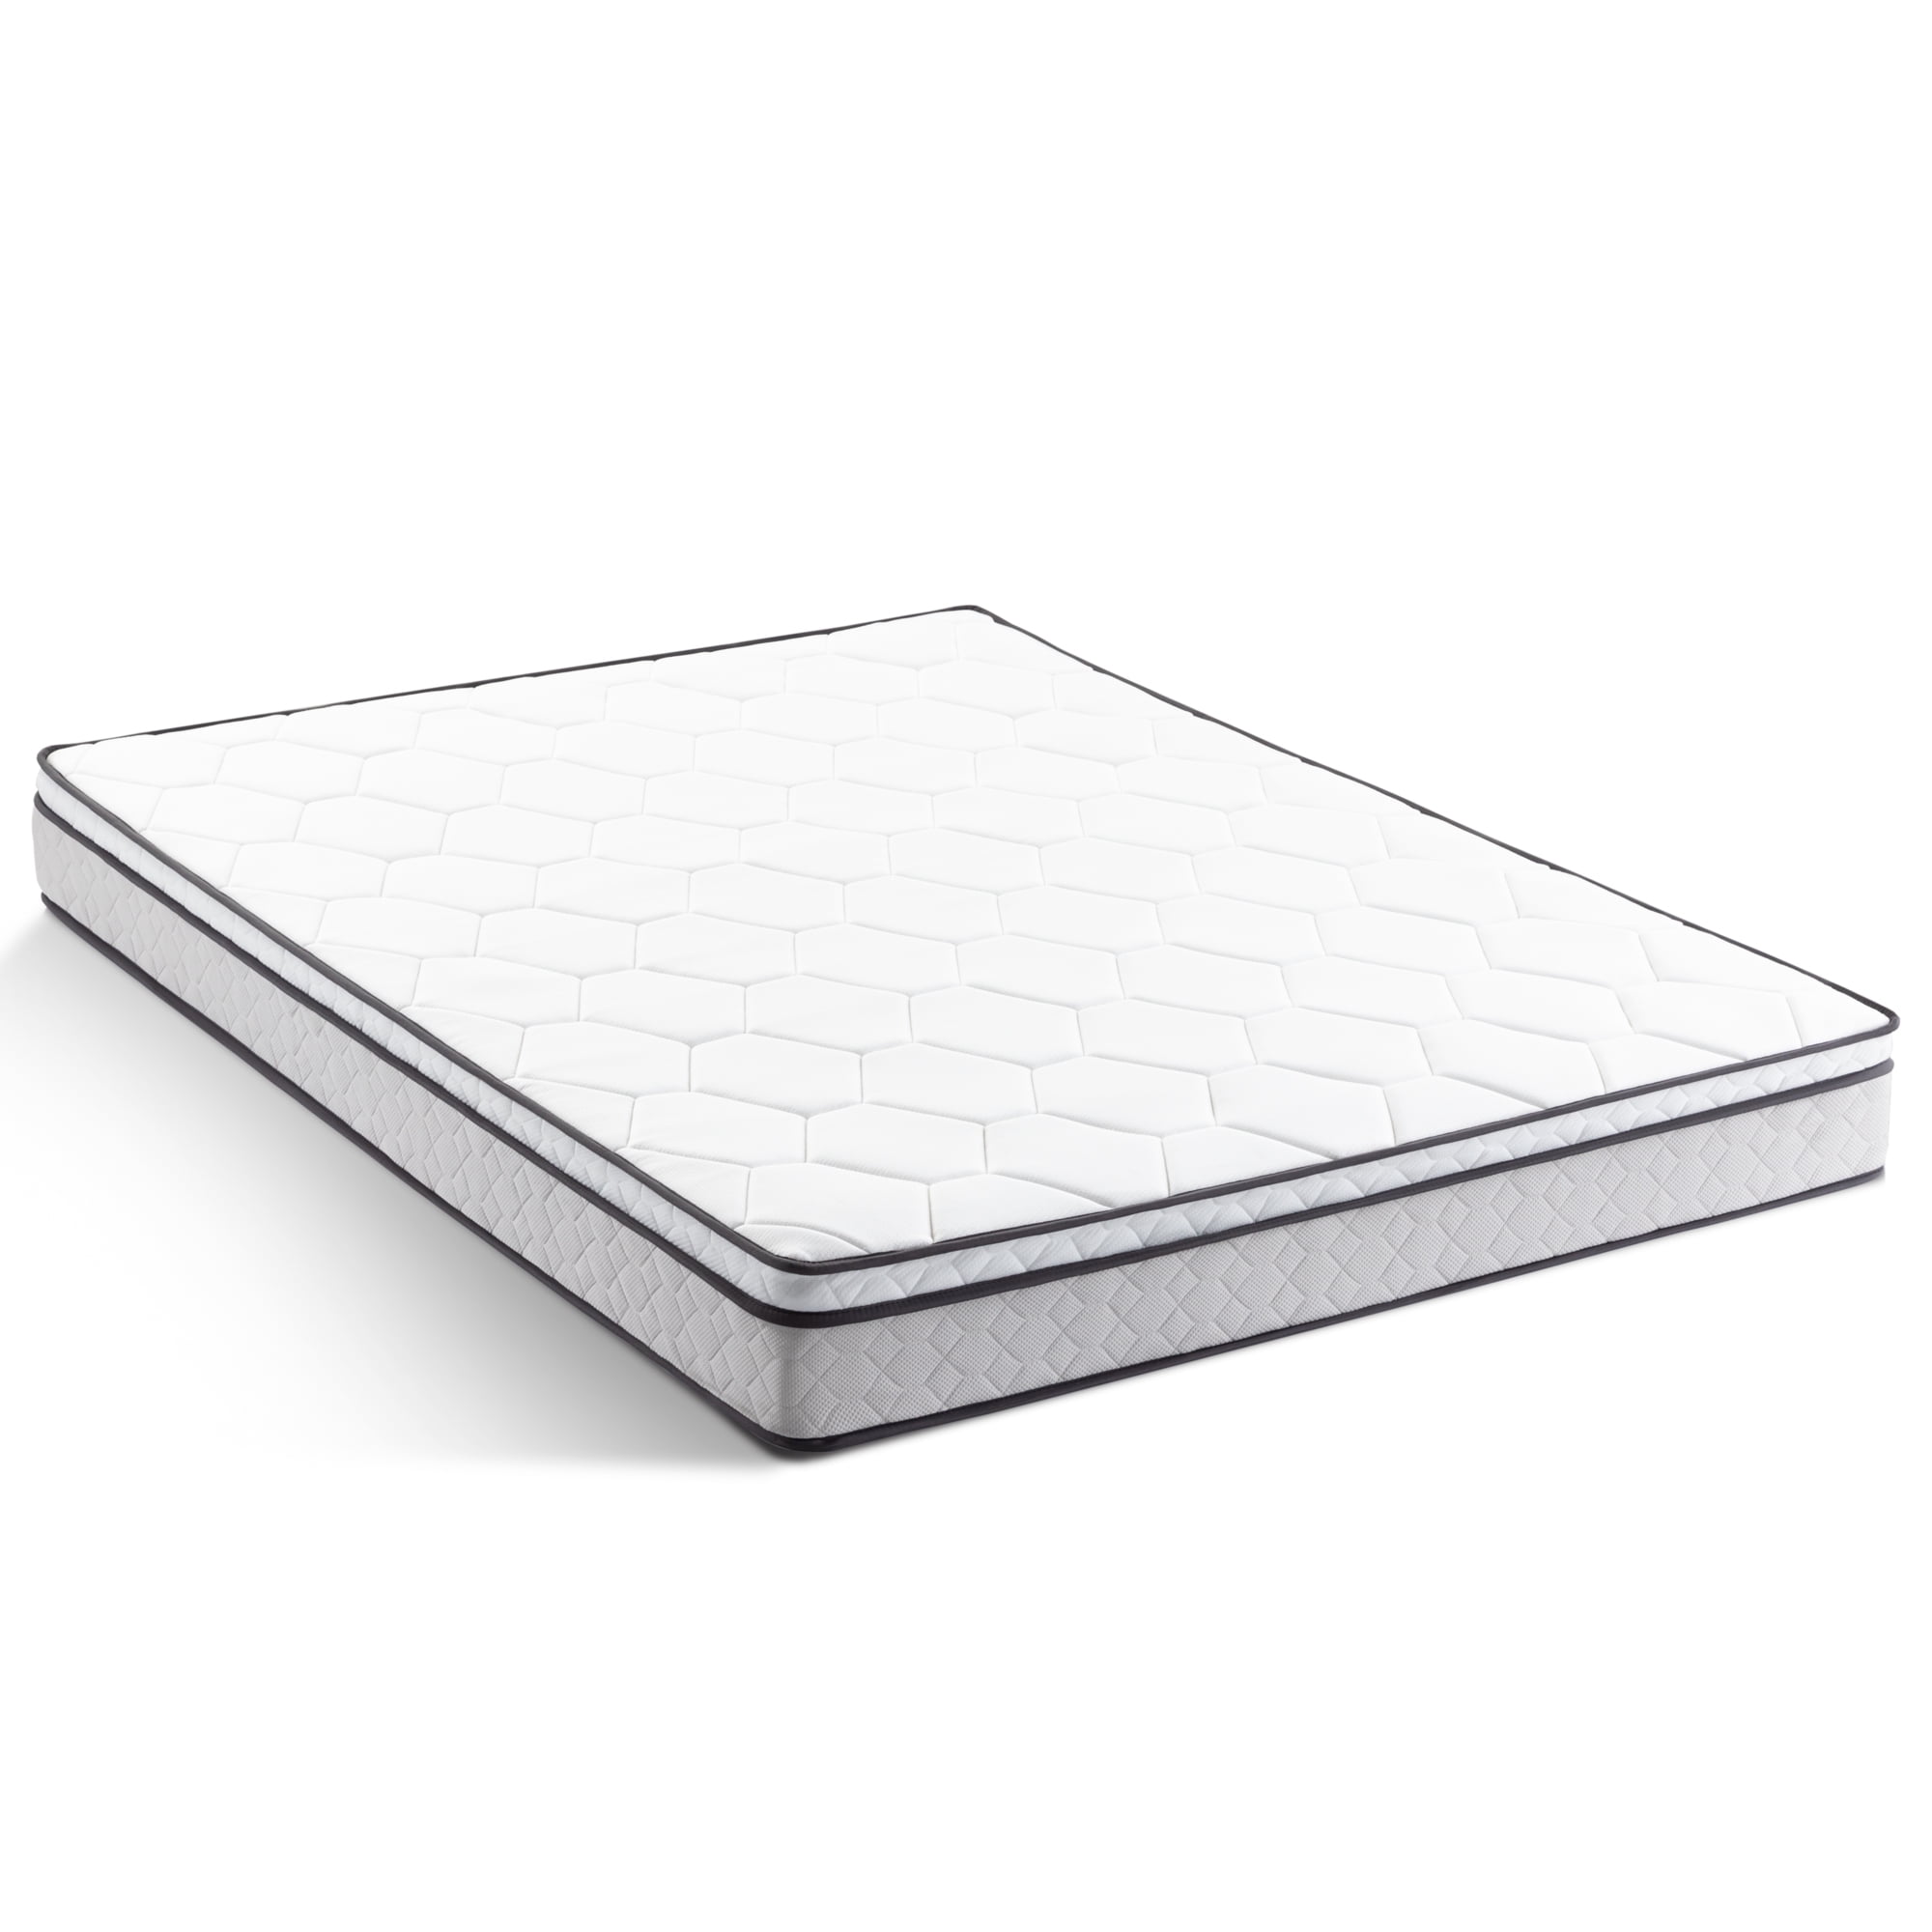 Details about   8" Mattress Standard Full Size Rolled Mattress Bedroom Heavy-duty Traditional 